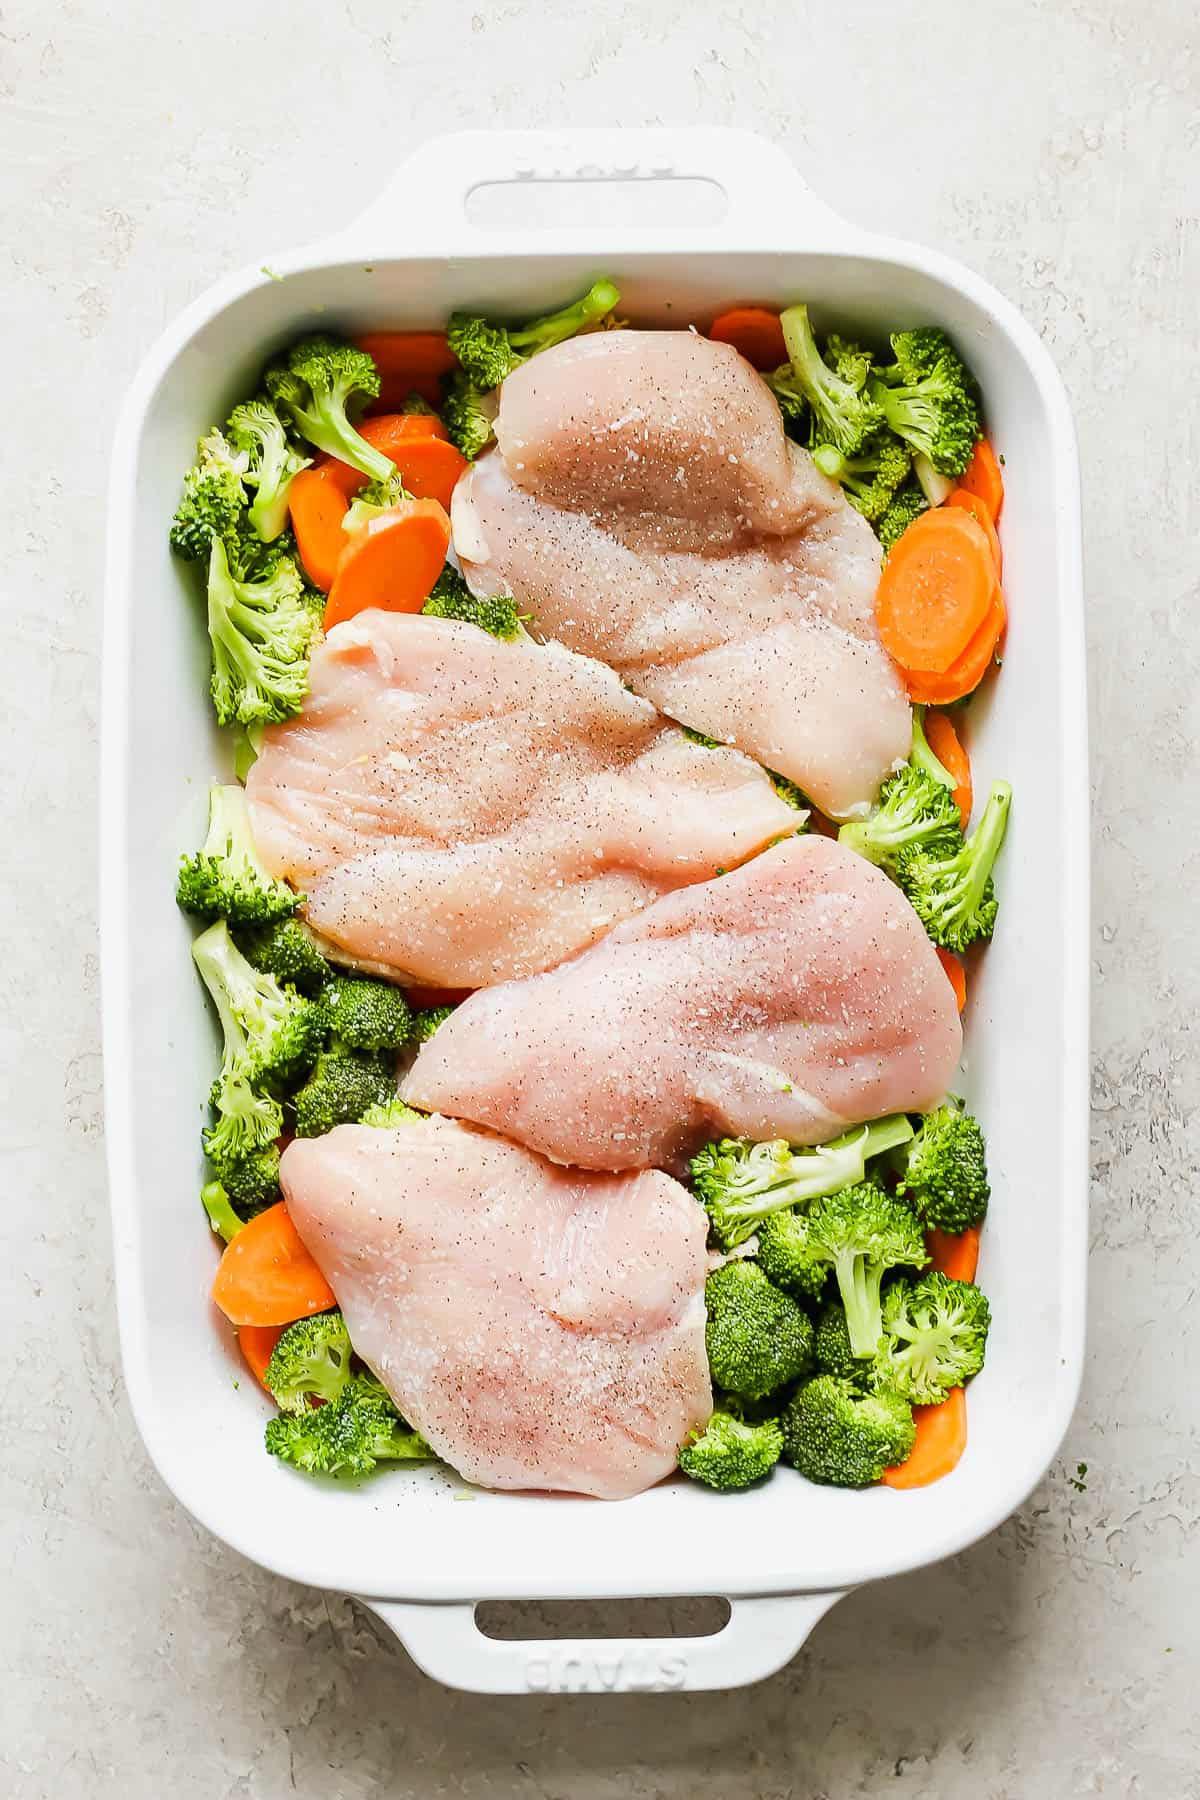 Seasoned chicken breasts on top of the veggies in the baking sheet.